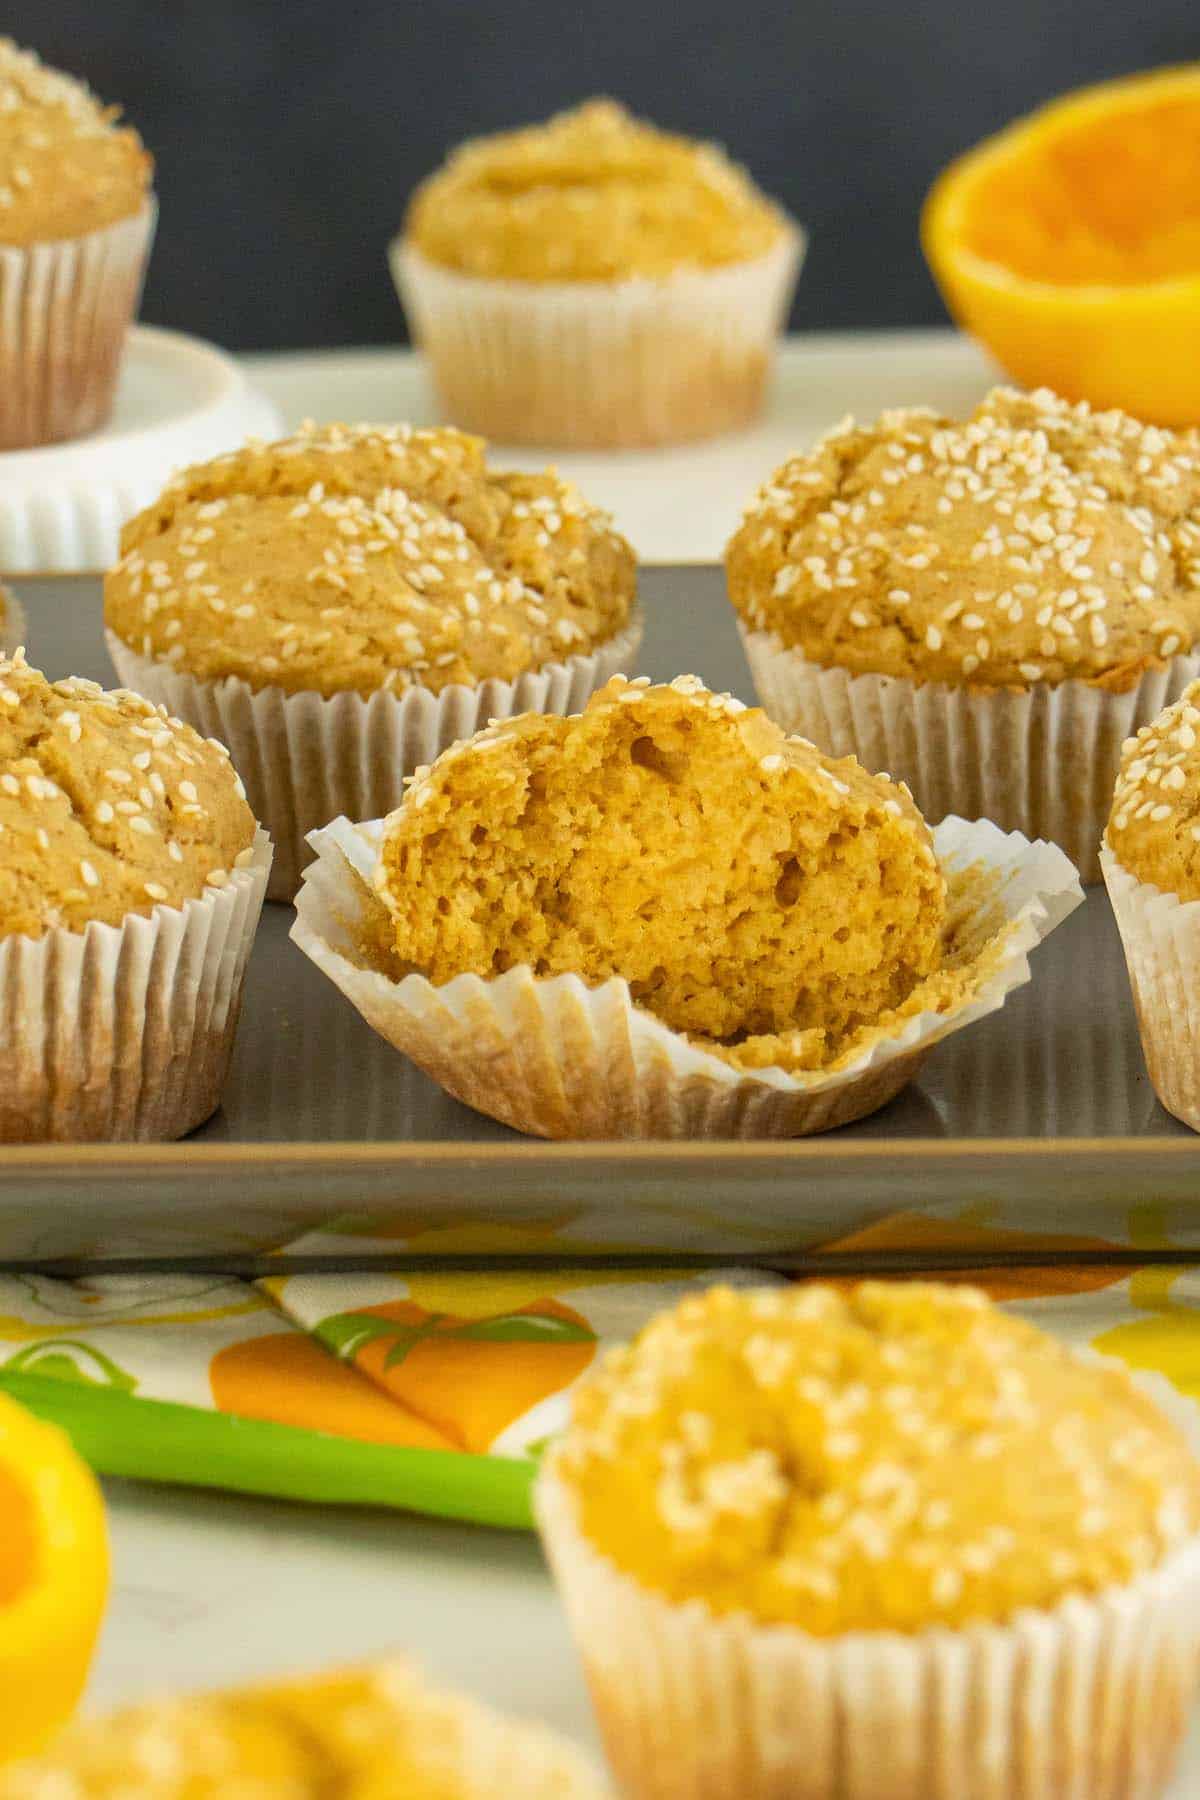 orange sesame muffins on a serving tray with oranges, one muffin torn in half, so you can see the texture inside